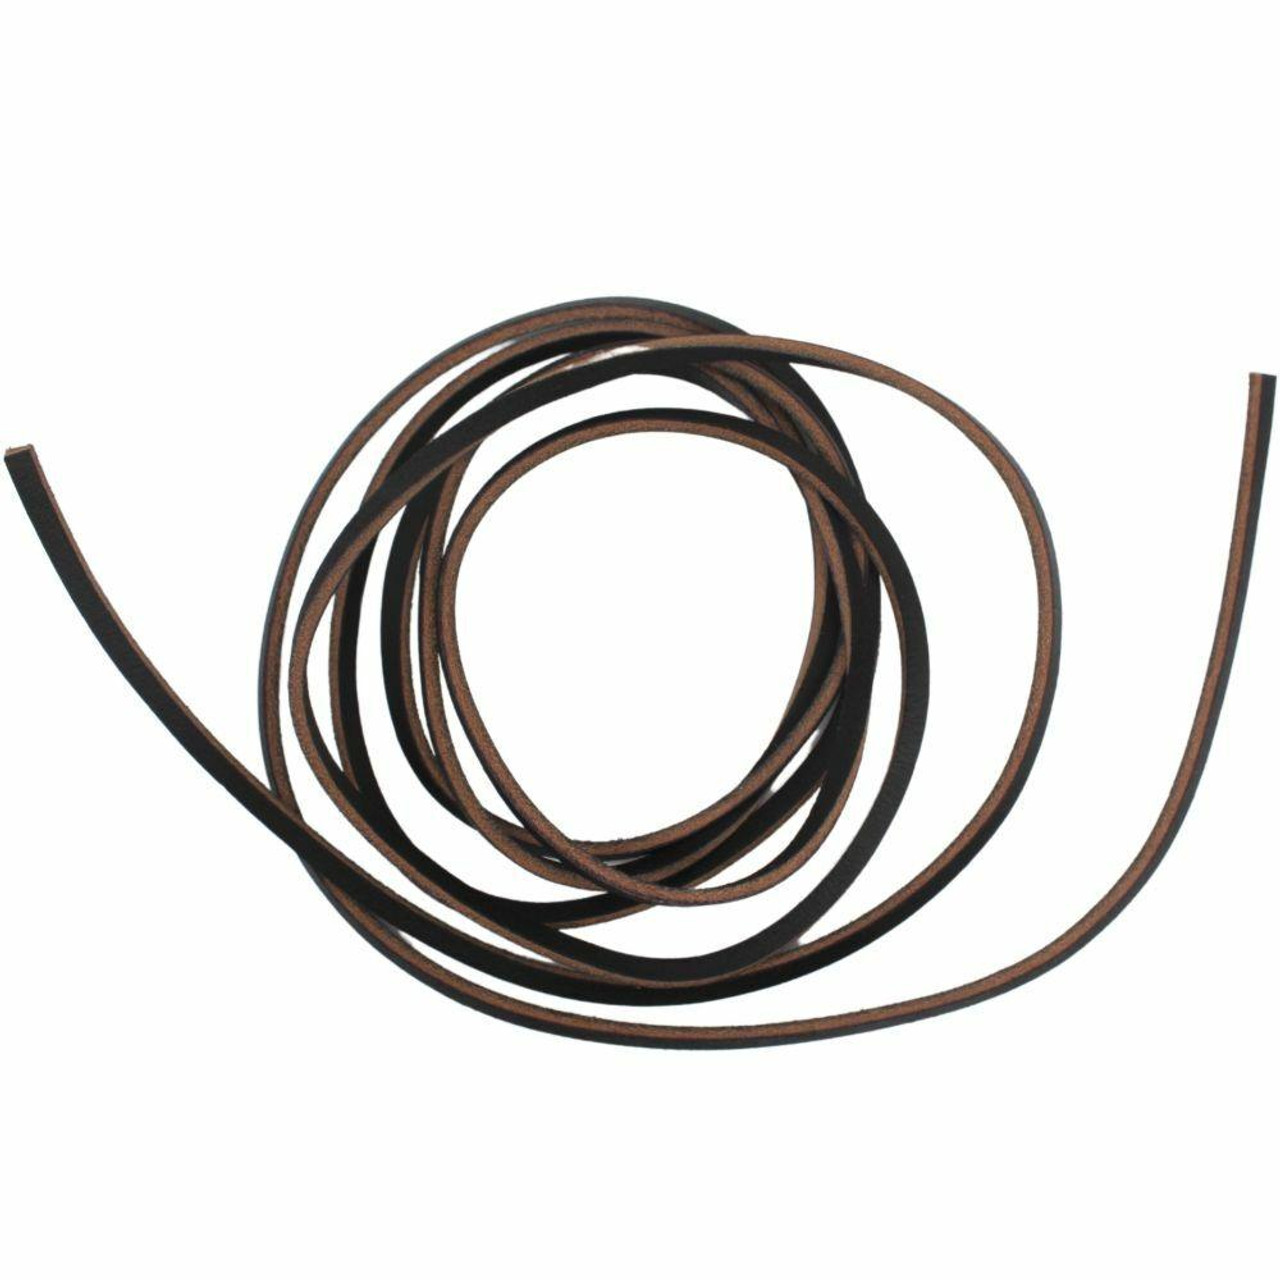 TOFL Leather Boot Laces | 72 Inches Long | 1/8 inch Thick | 2 Leather Strips | 1 Pair Medium Brown Laces